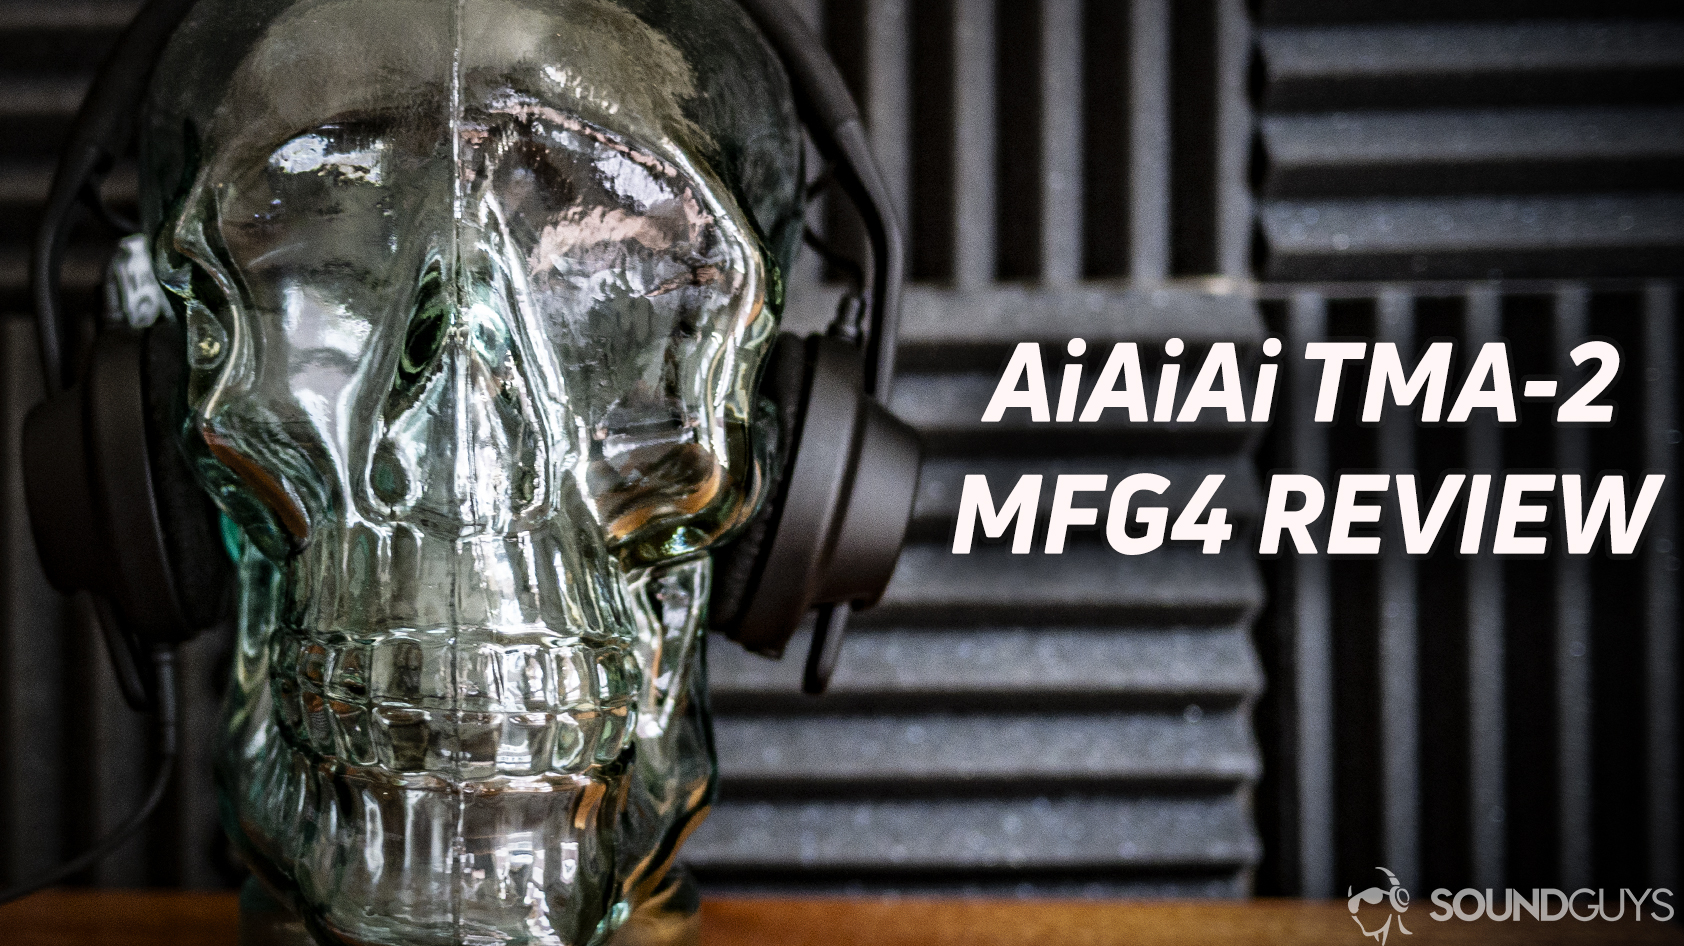 A photo of the AIAIAI TMA-2 MFG4 resting on a glass skull, in front of acoustic foam.